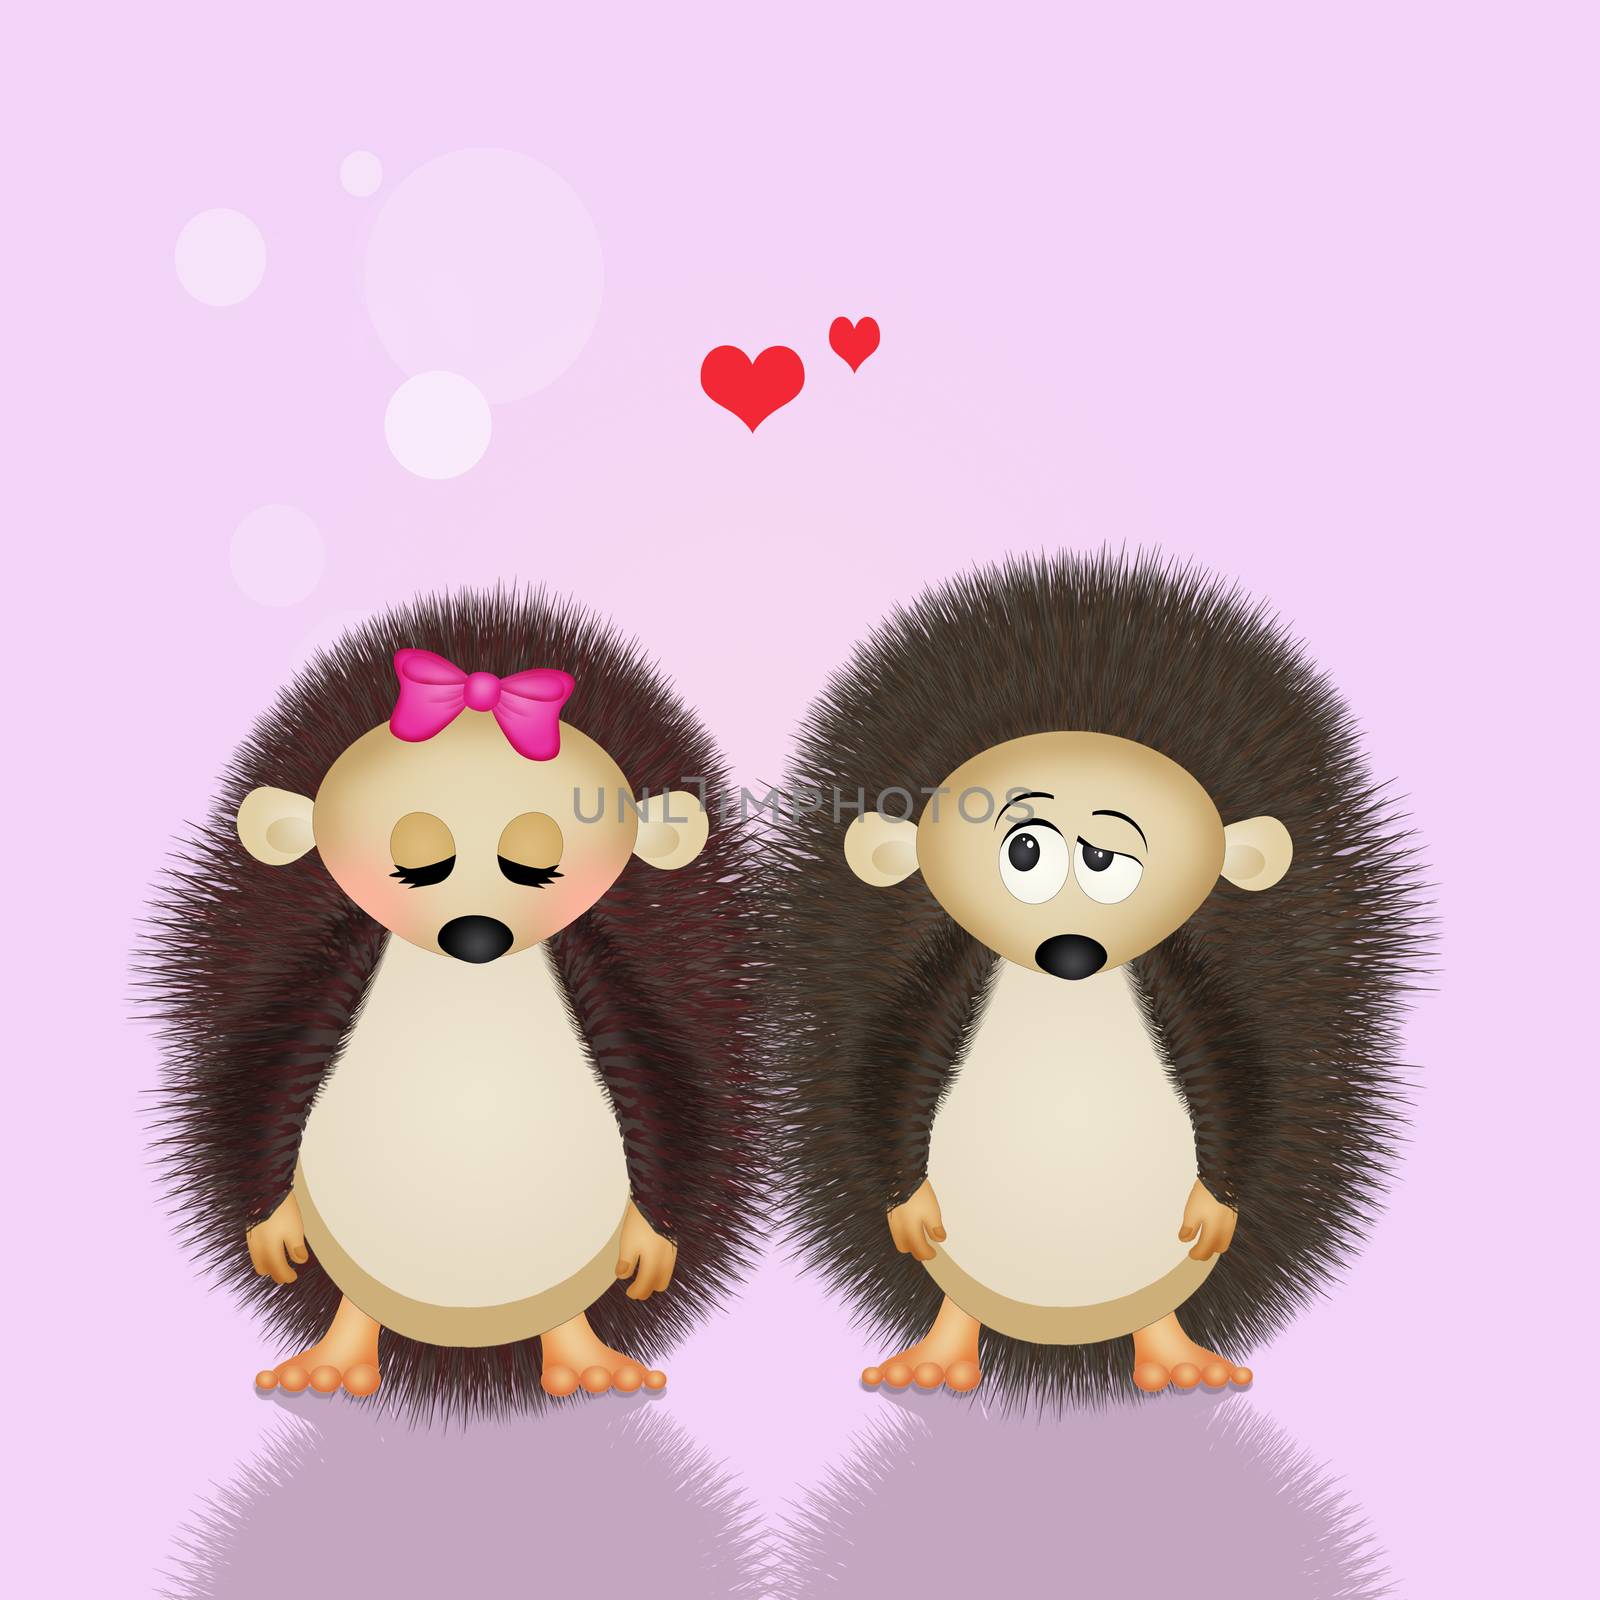 Hedgehogs in love by adrenalina